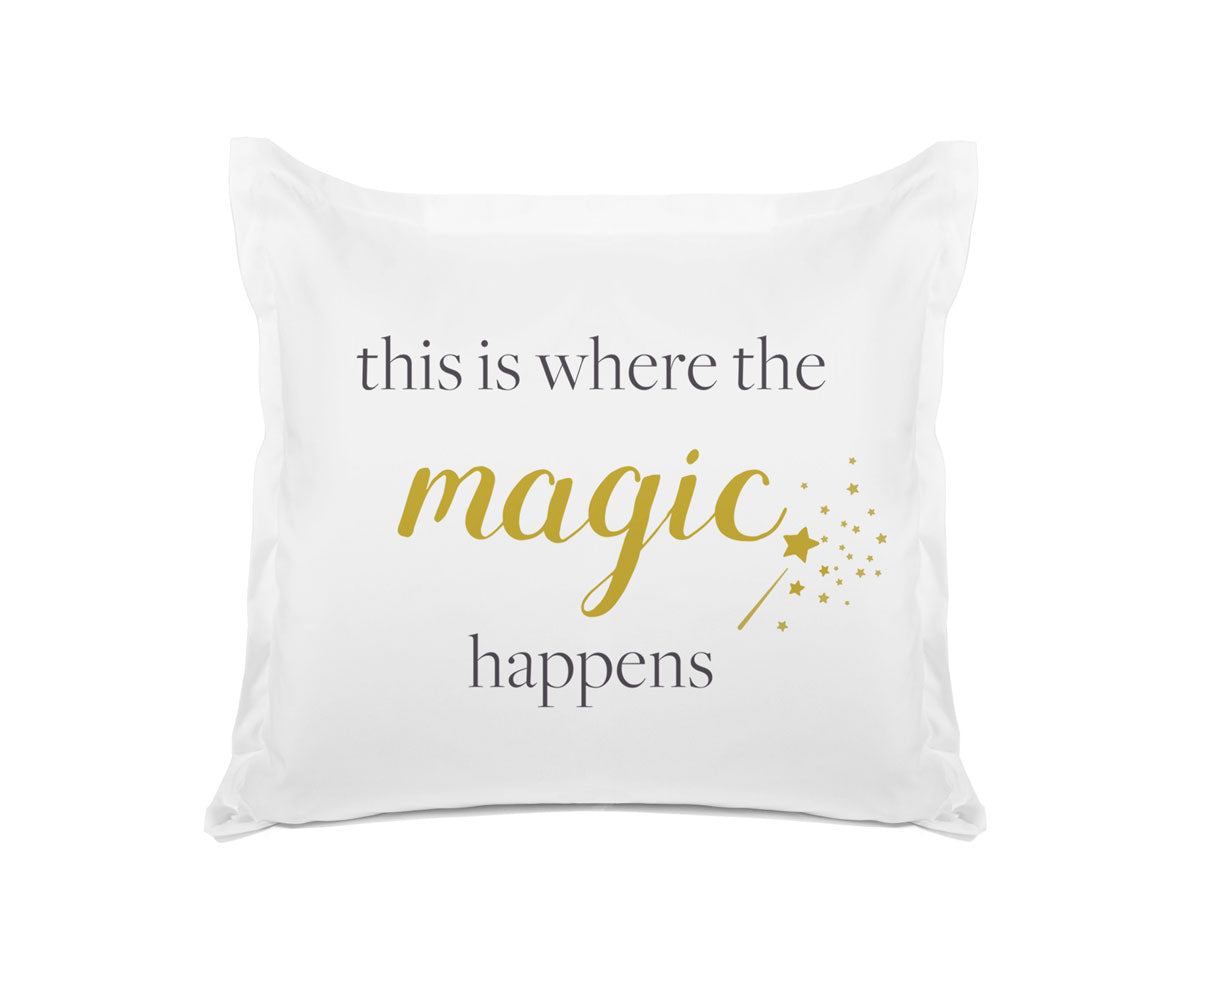 This Is Where The Magic Happens - Inspirational Quotes Pillowcase Collection-Di Lewis